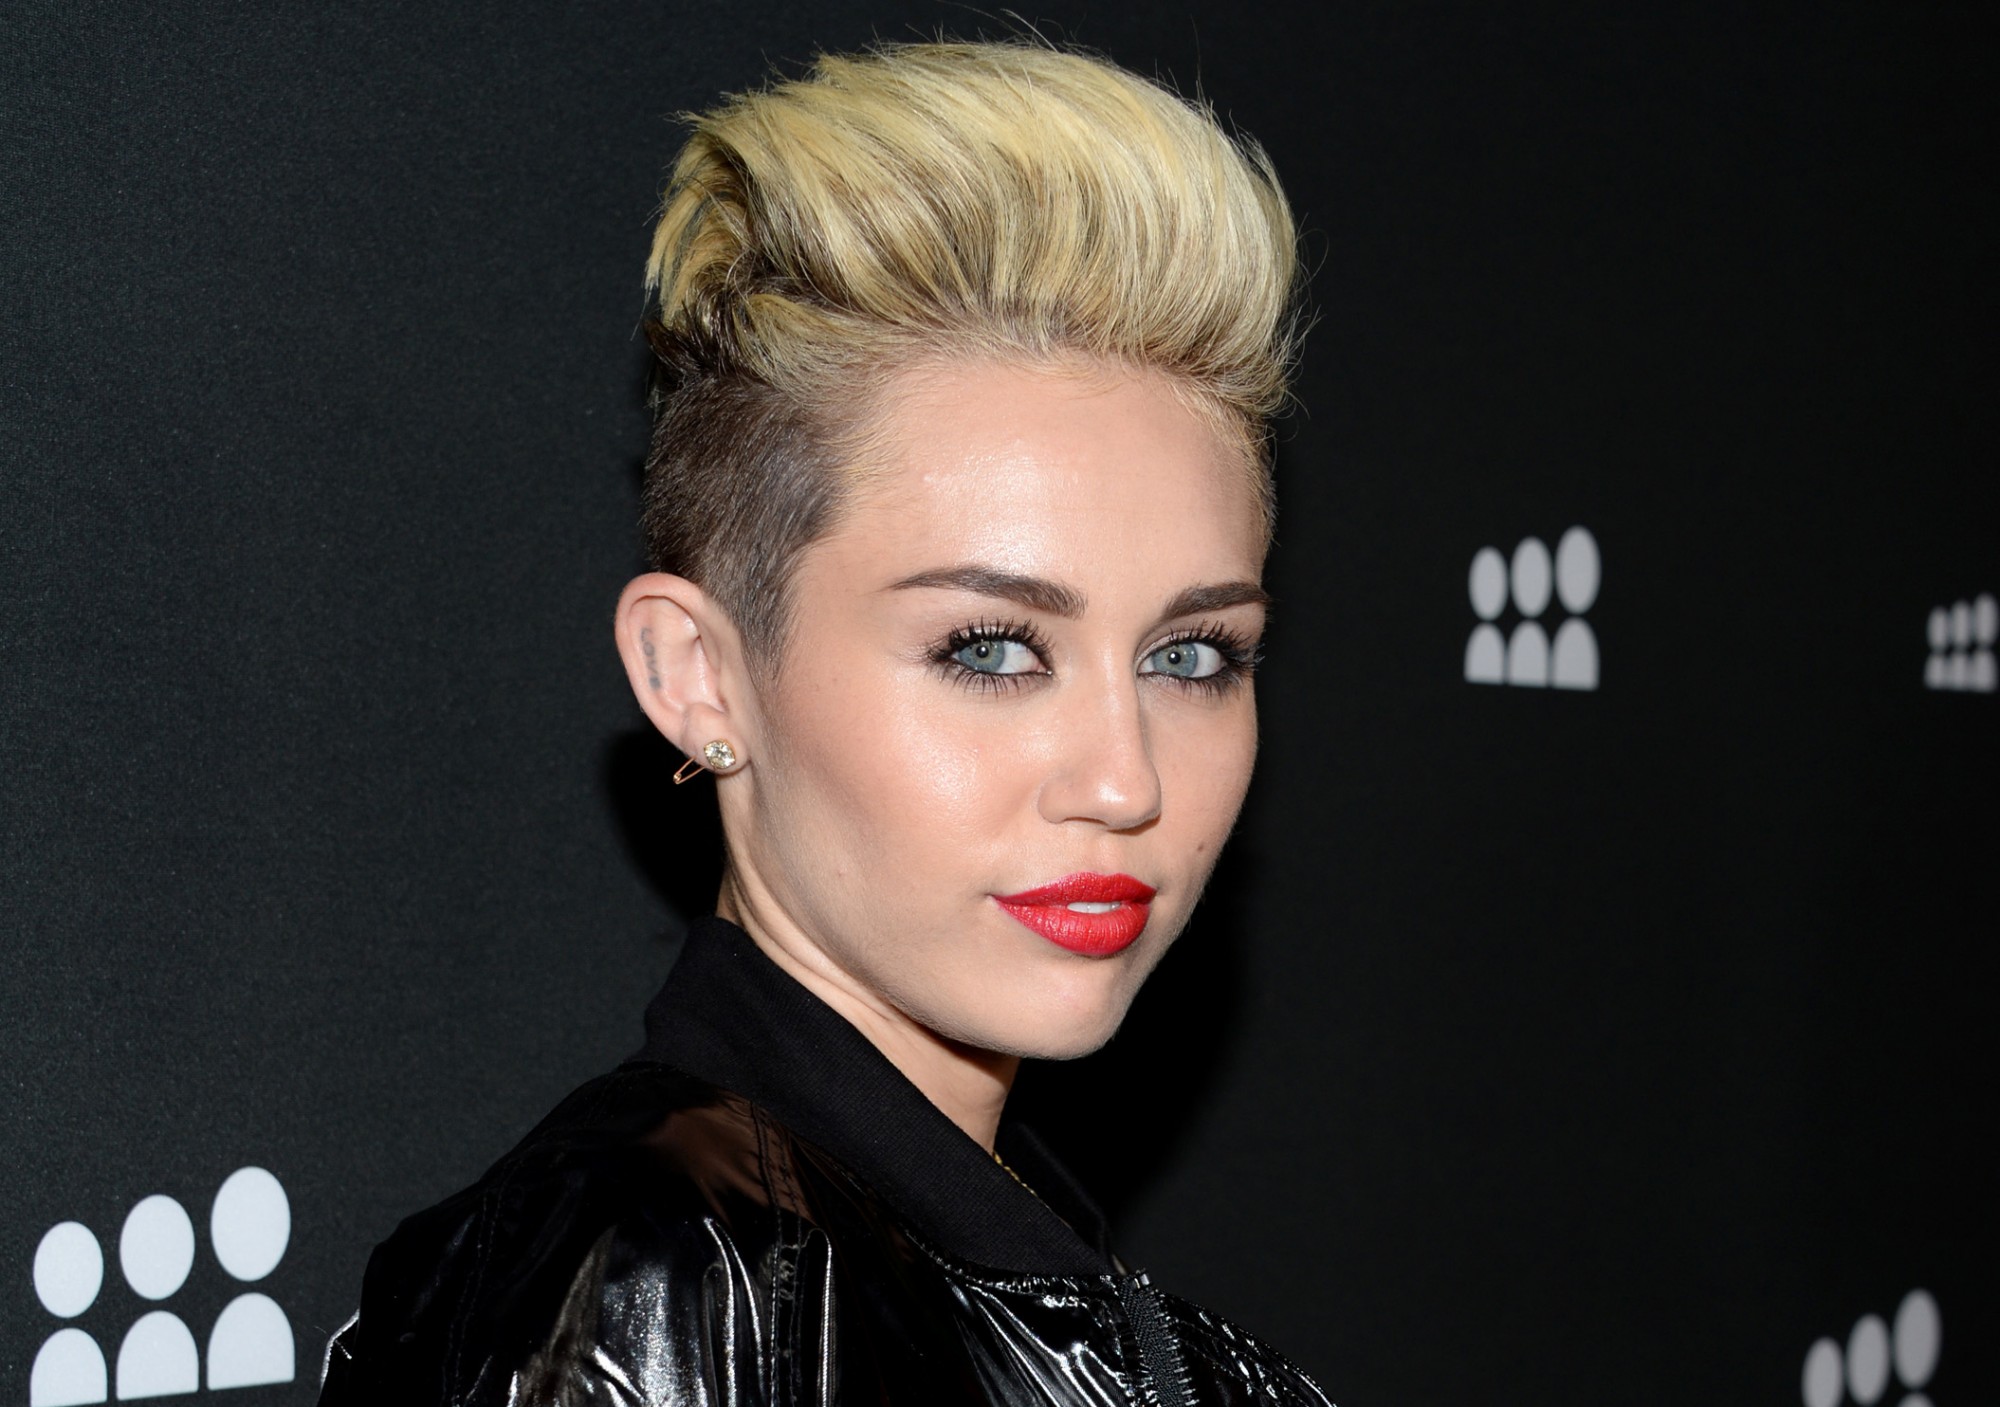 5 Deciphering Answers To Miley Cyrus’s New Album Title – BANGERZ